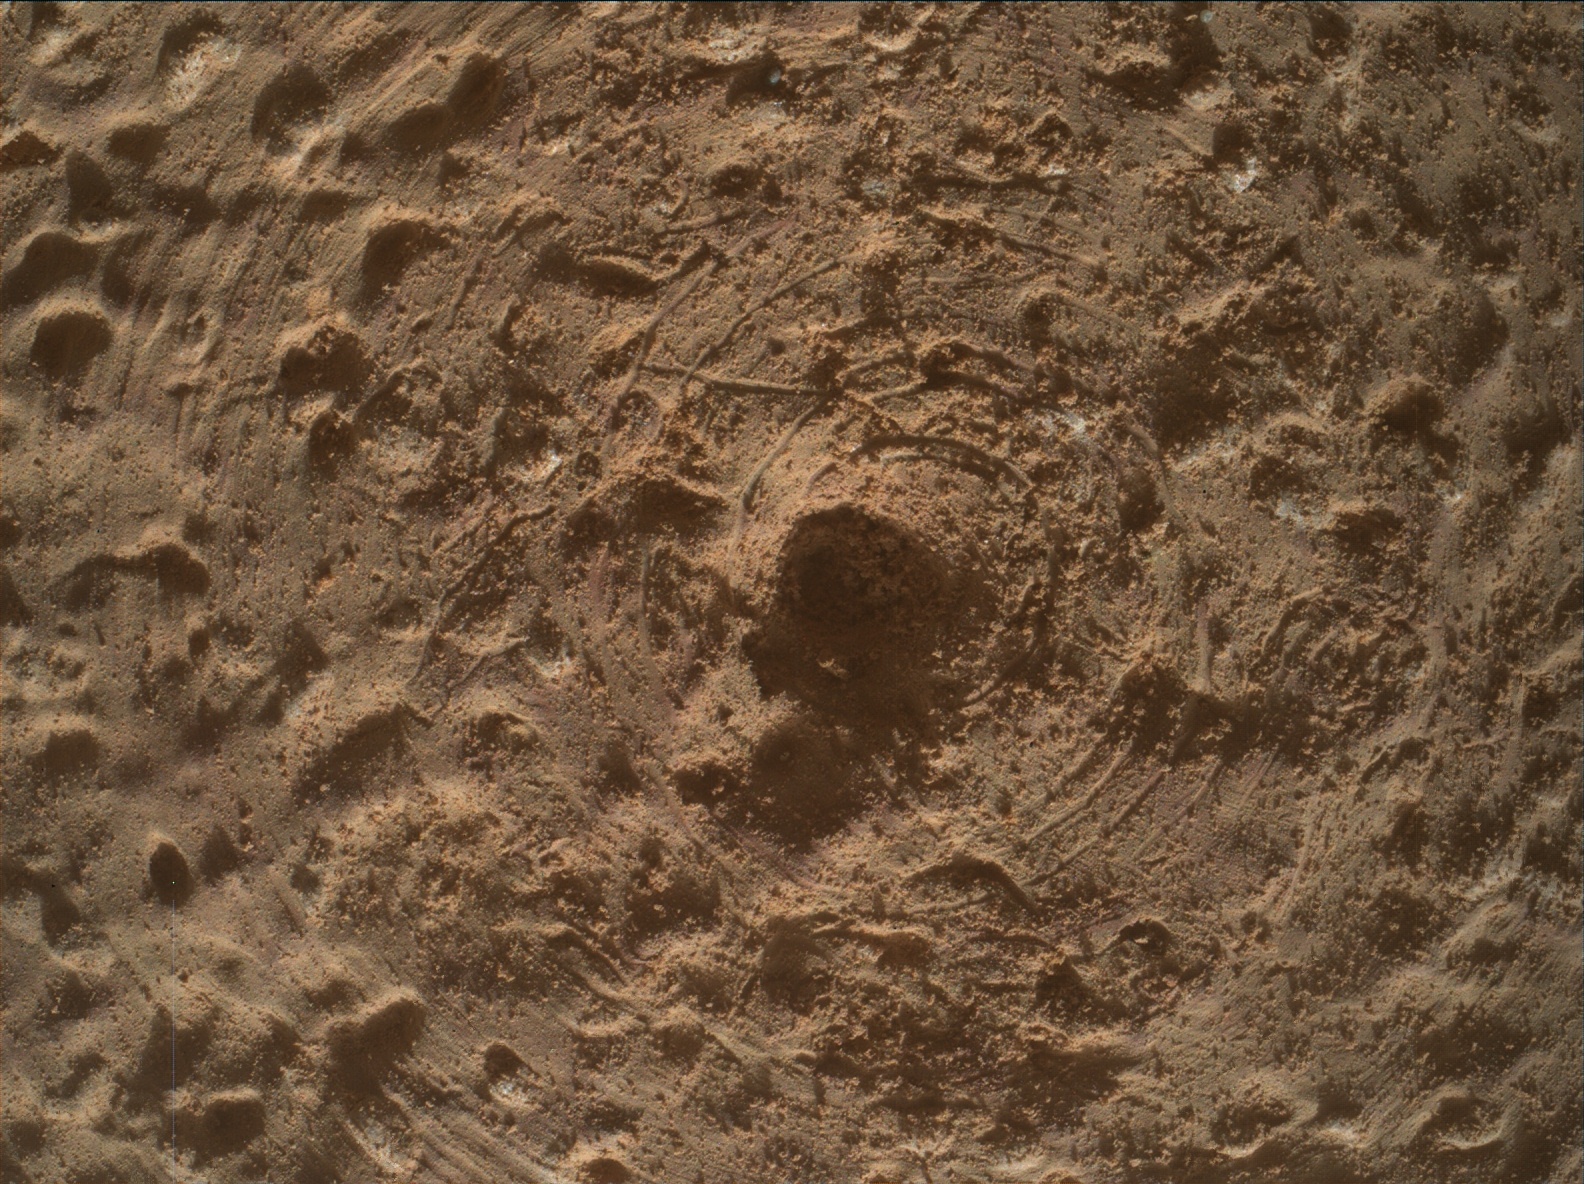 Nasa's Mars rover Curiosity acquired this image using its Mars Hand Lens Imager (MAHLI) on Sol 3222